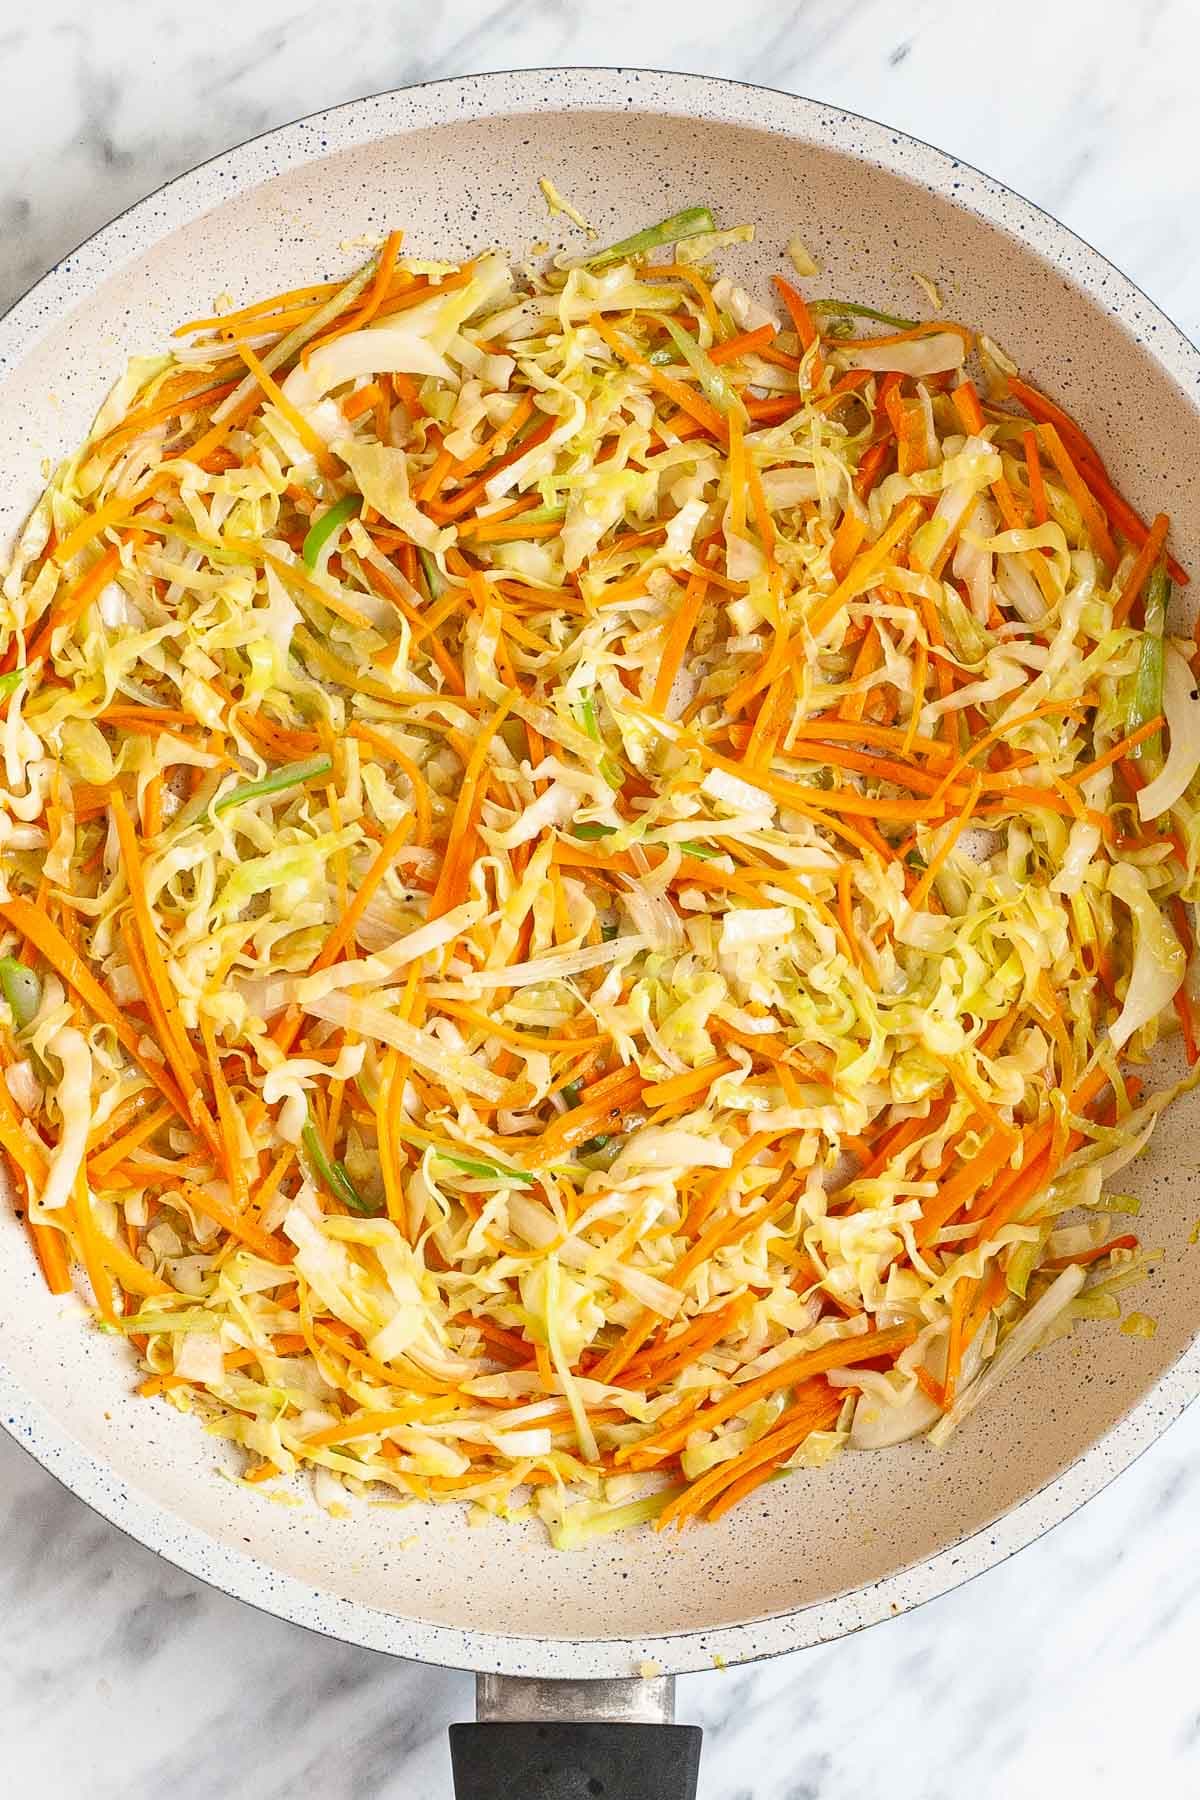 White frying pan with shredded orange, green and white vegetables.